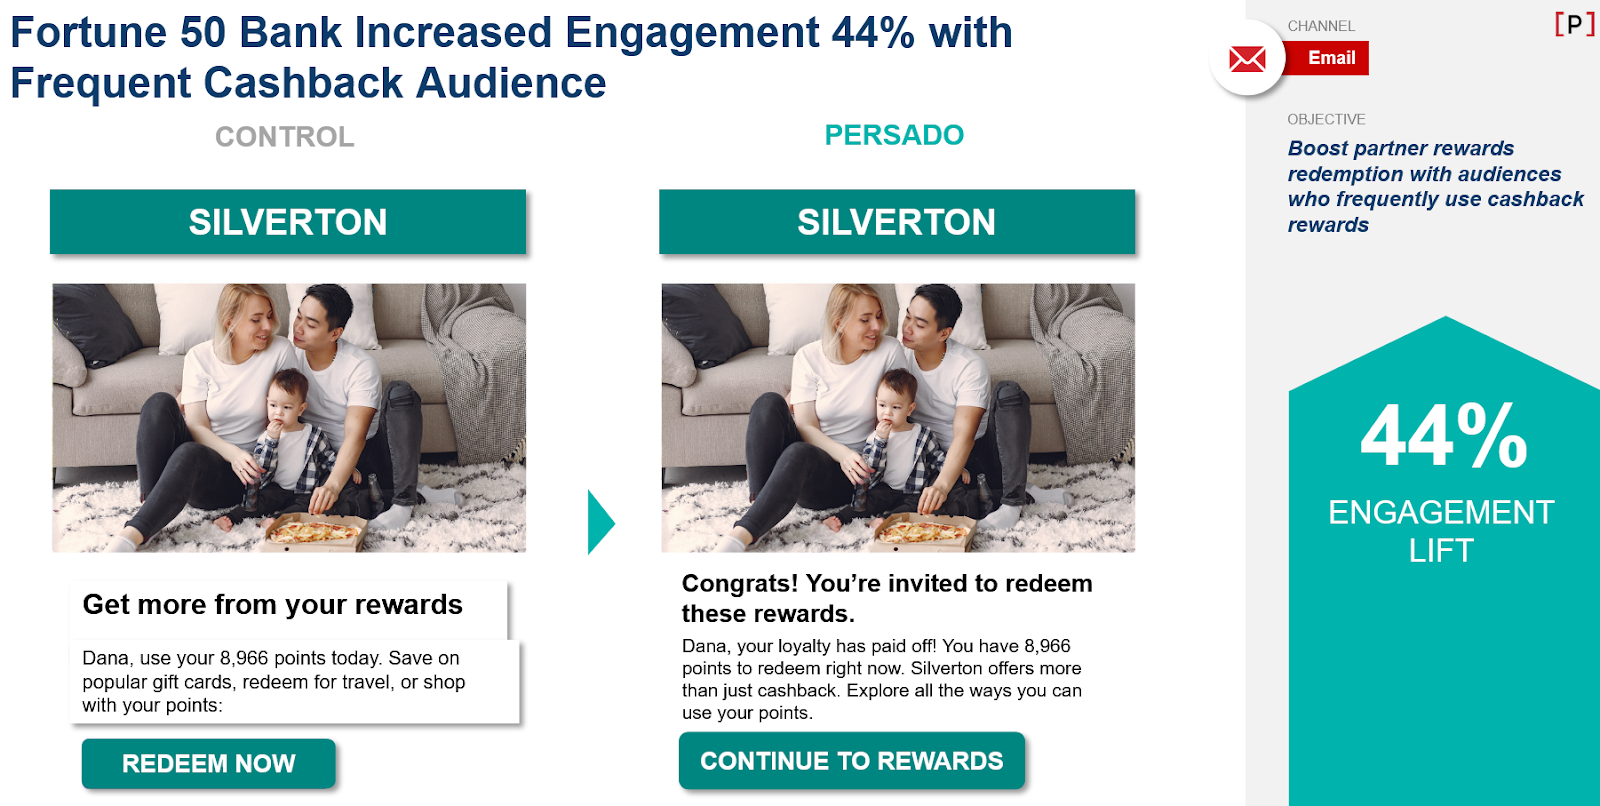 A Fortune 50 bank increased email engagement by 44% using motivation-aware Generative AI in its marketing strategy.